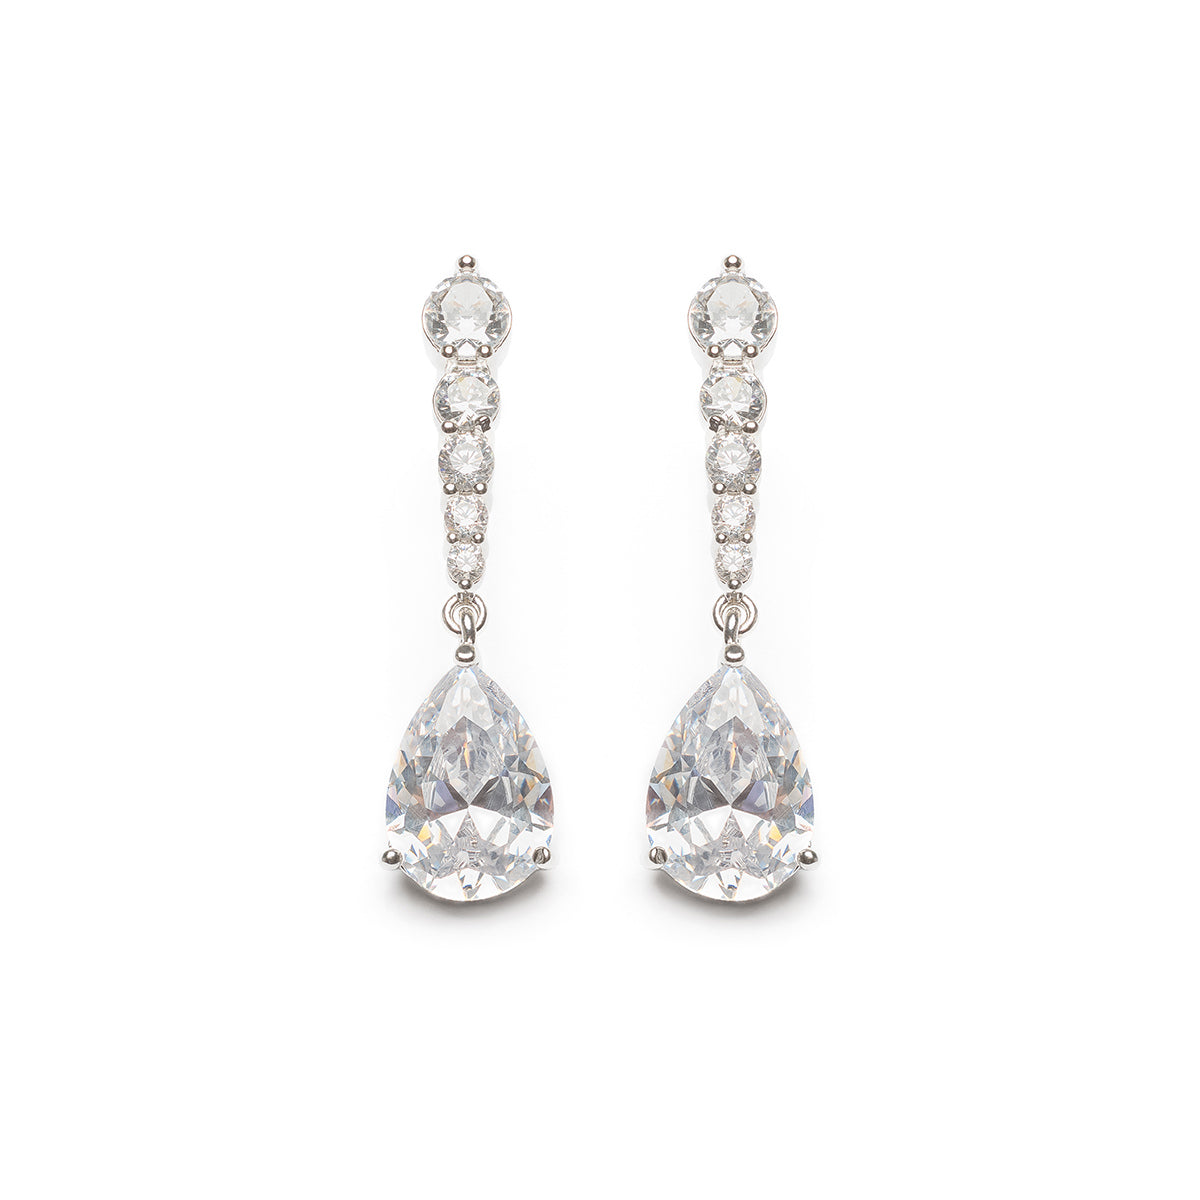 Silver white crystal drop earrings - Simply Whispers